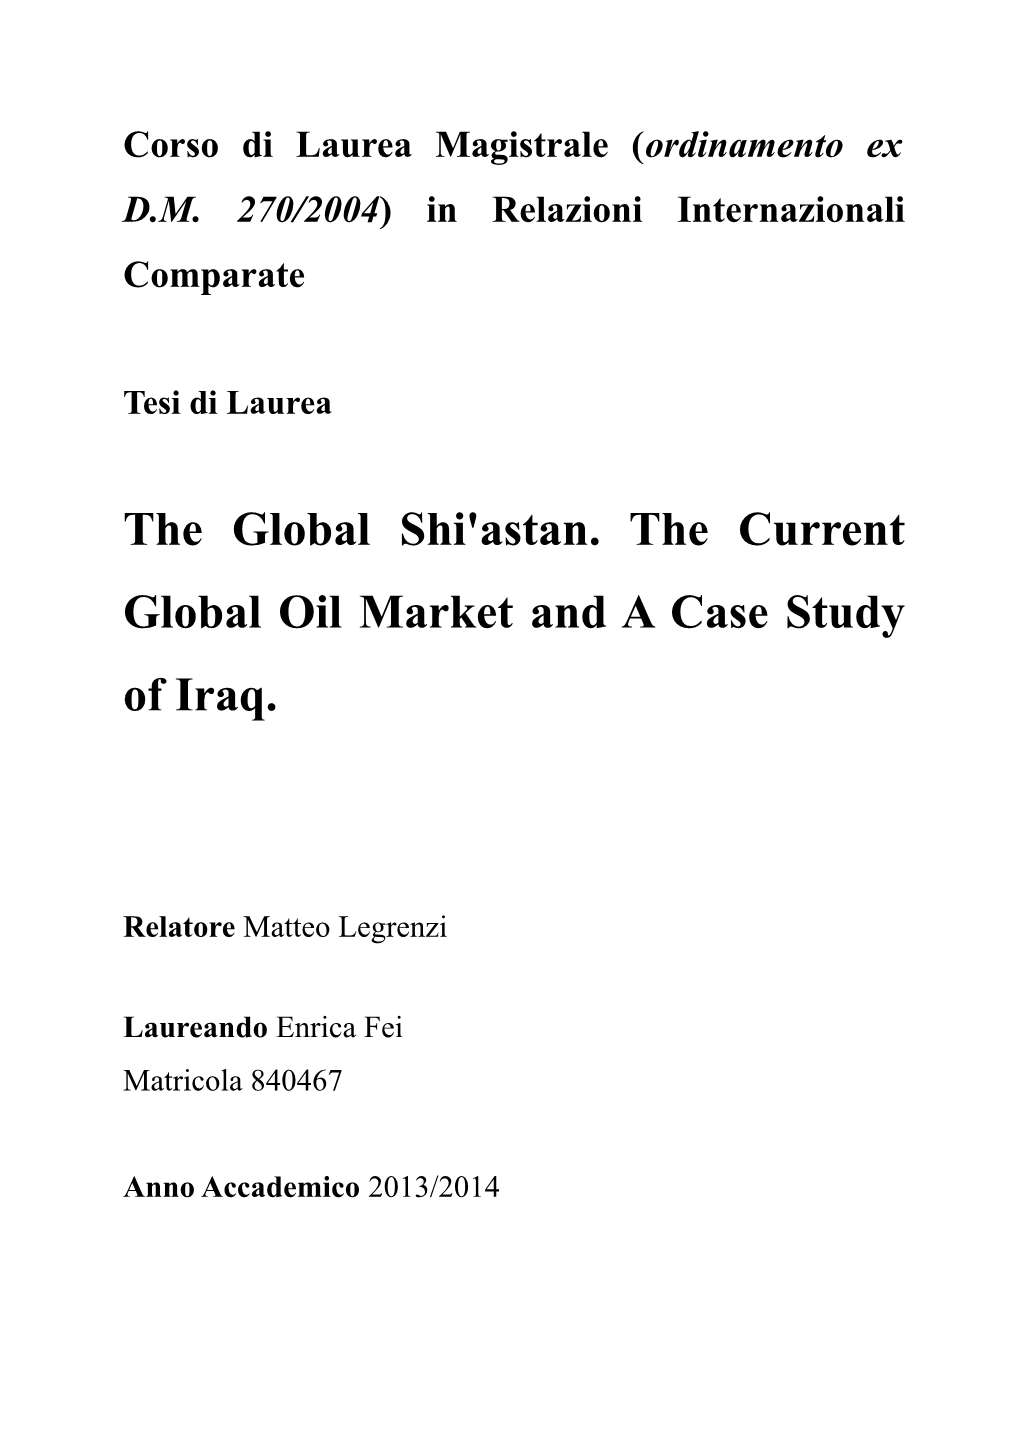 The Global Shi'astan. the Current Global Oil Market and a Case Study of Iraq